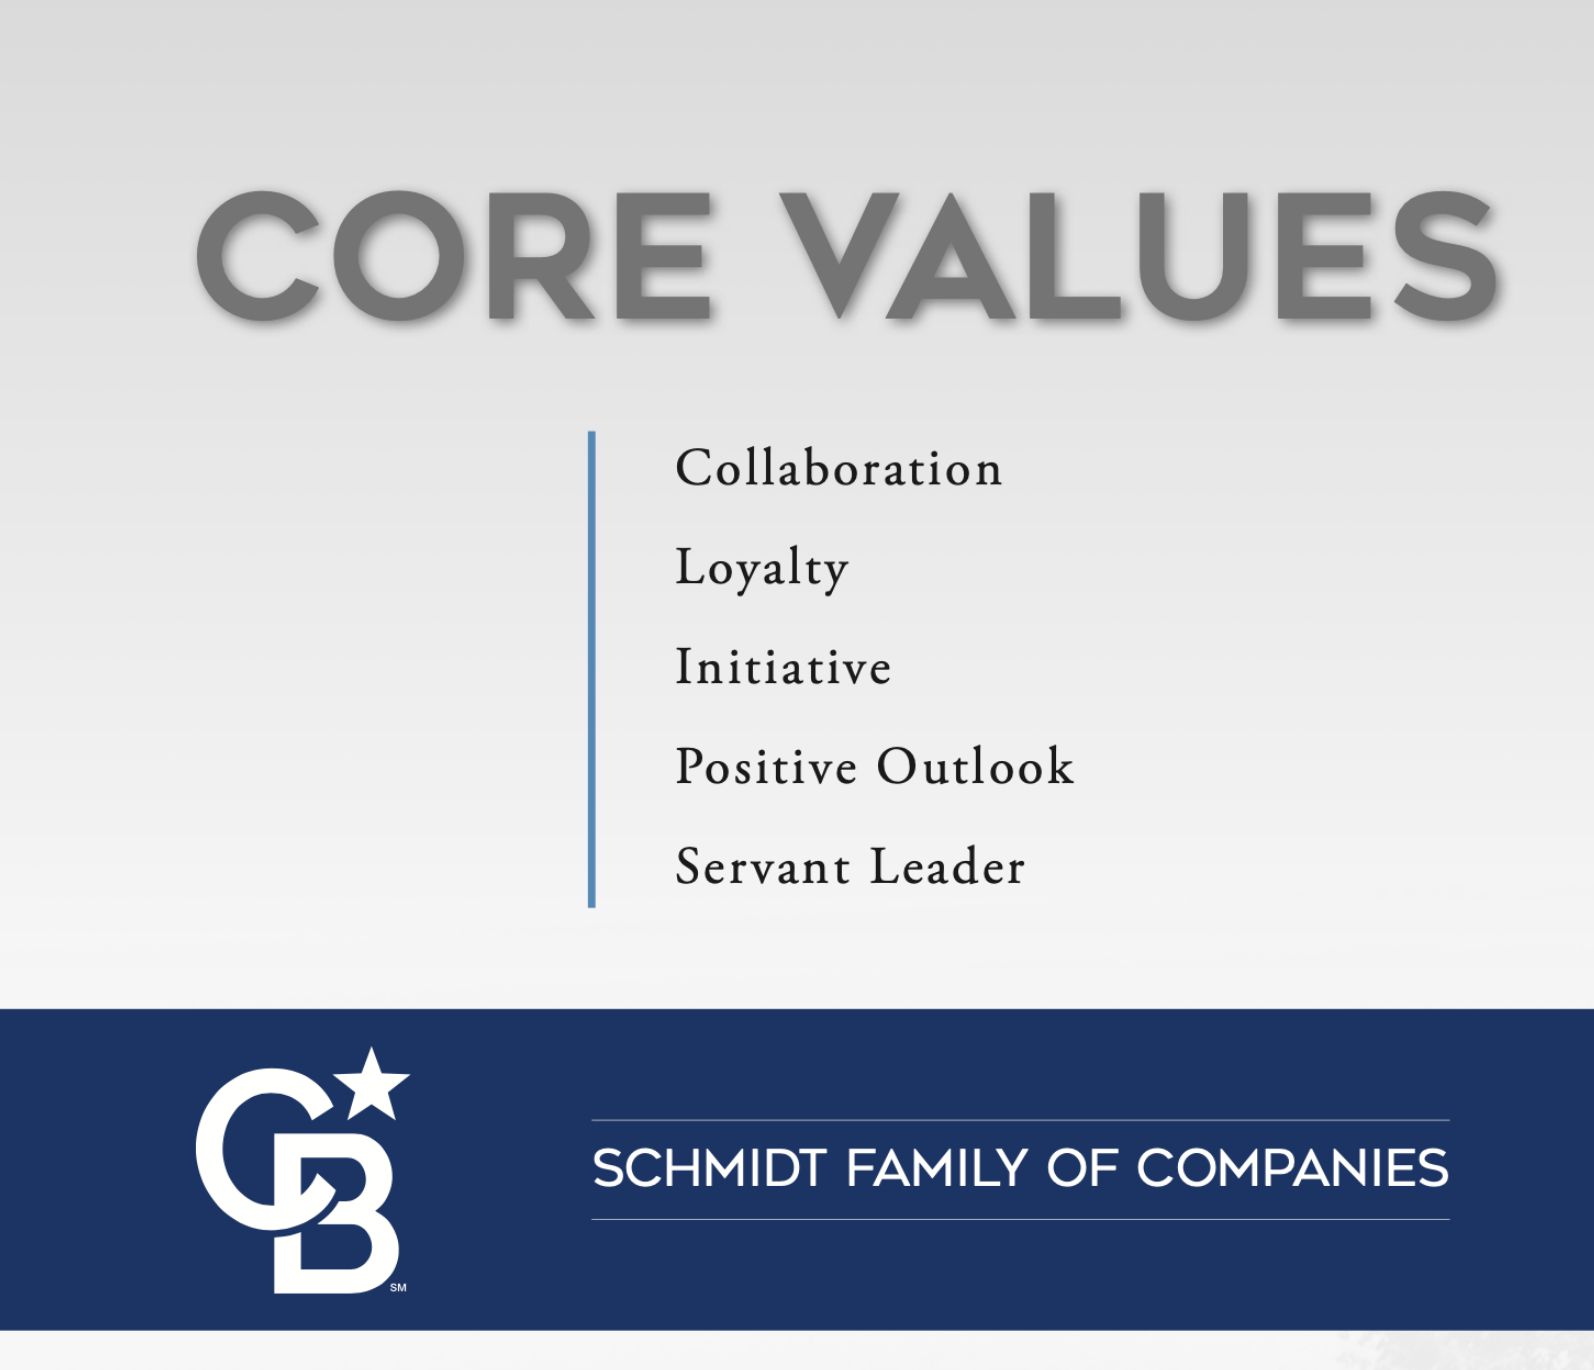 Core Values Wall Art (All Brands)